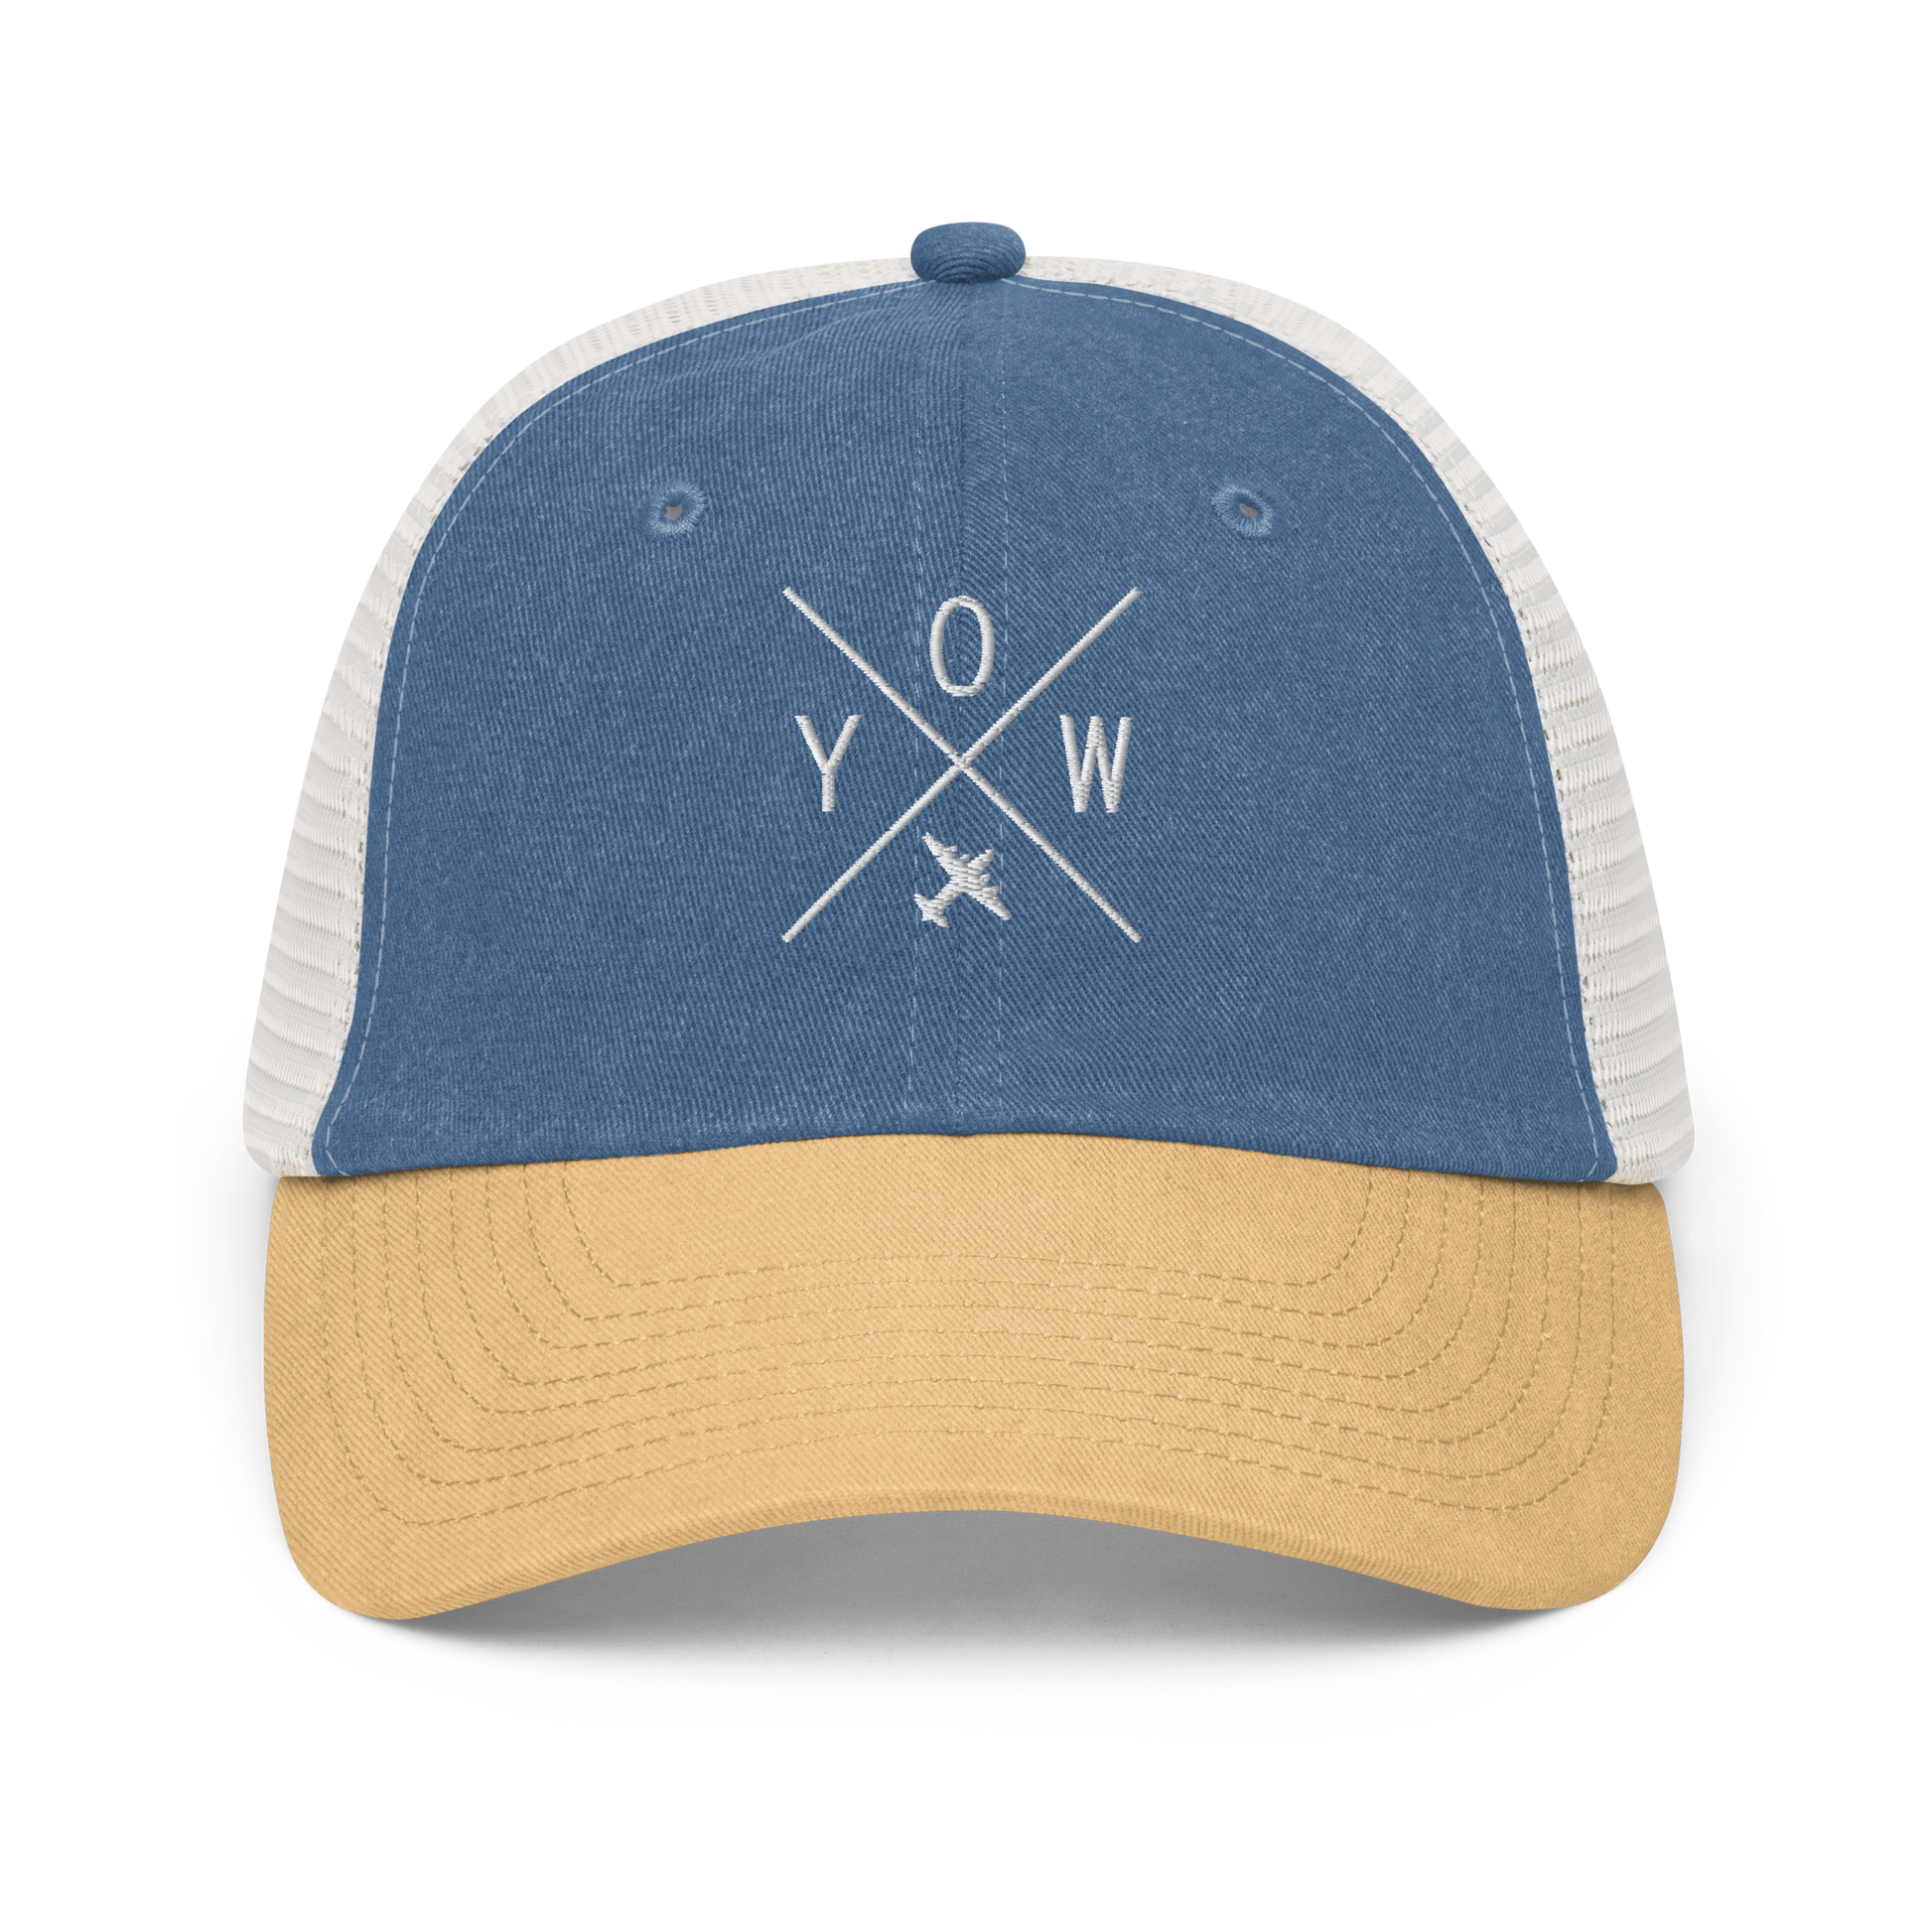 YHM Designs - YOW Ottawa Pigment-Dyed Trucker Cap - Crossed-X Design with Airport Code and Vintage Propliner - White Embroidery - Image 01